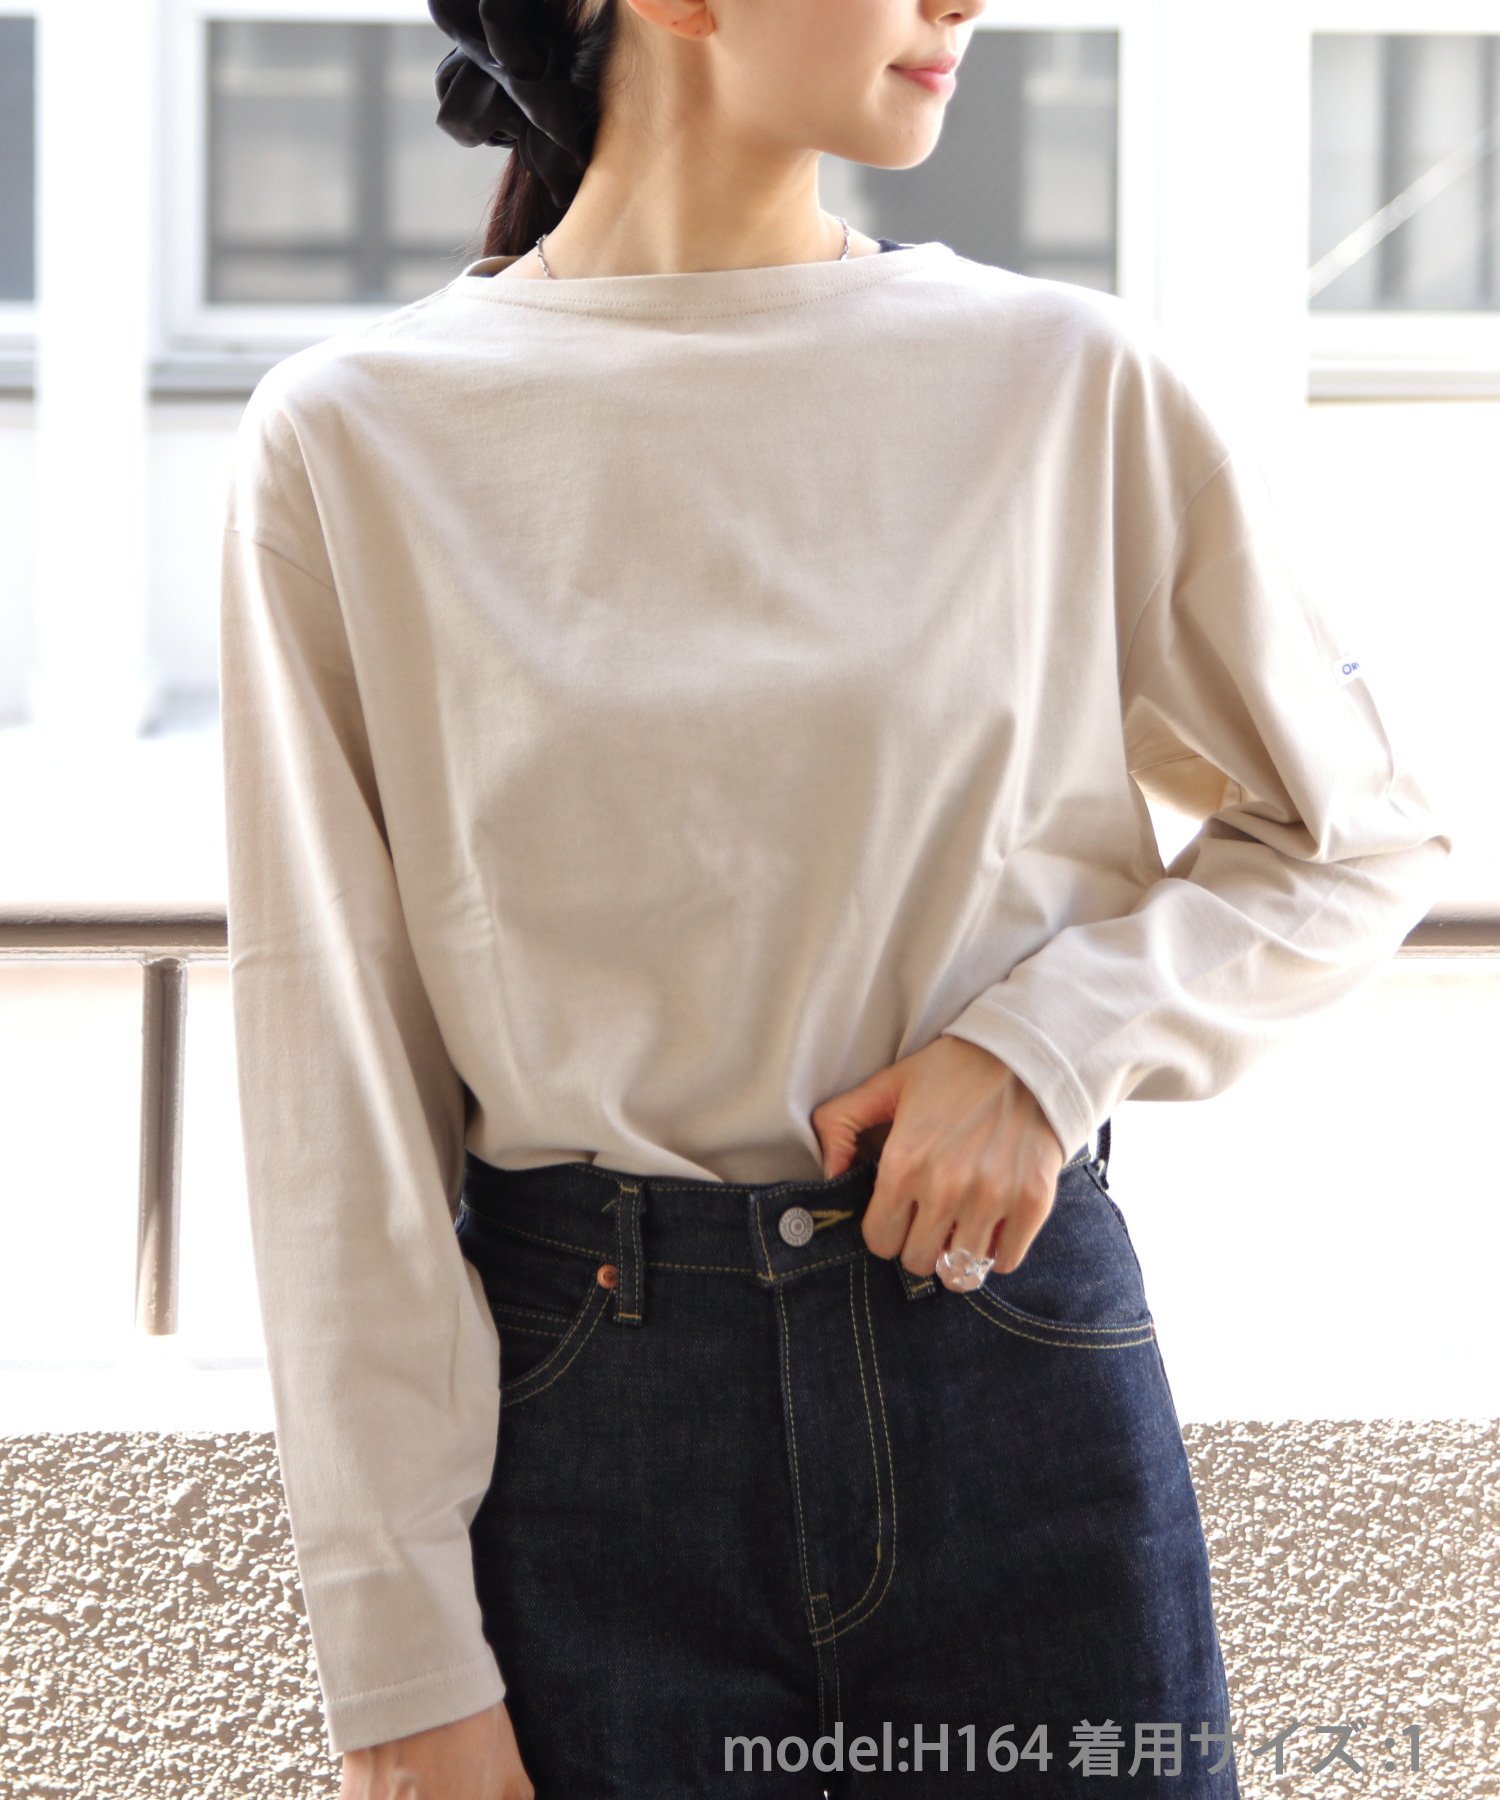 ORCIVAL ORCIVAL/(W)40/2 BOATNECK LONG C0333 SOLID ステップス トップス カットソー・Tシャツ ベージュ ブラック ホワイト【送料無料】